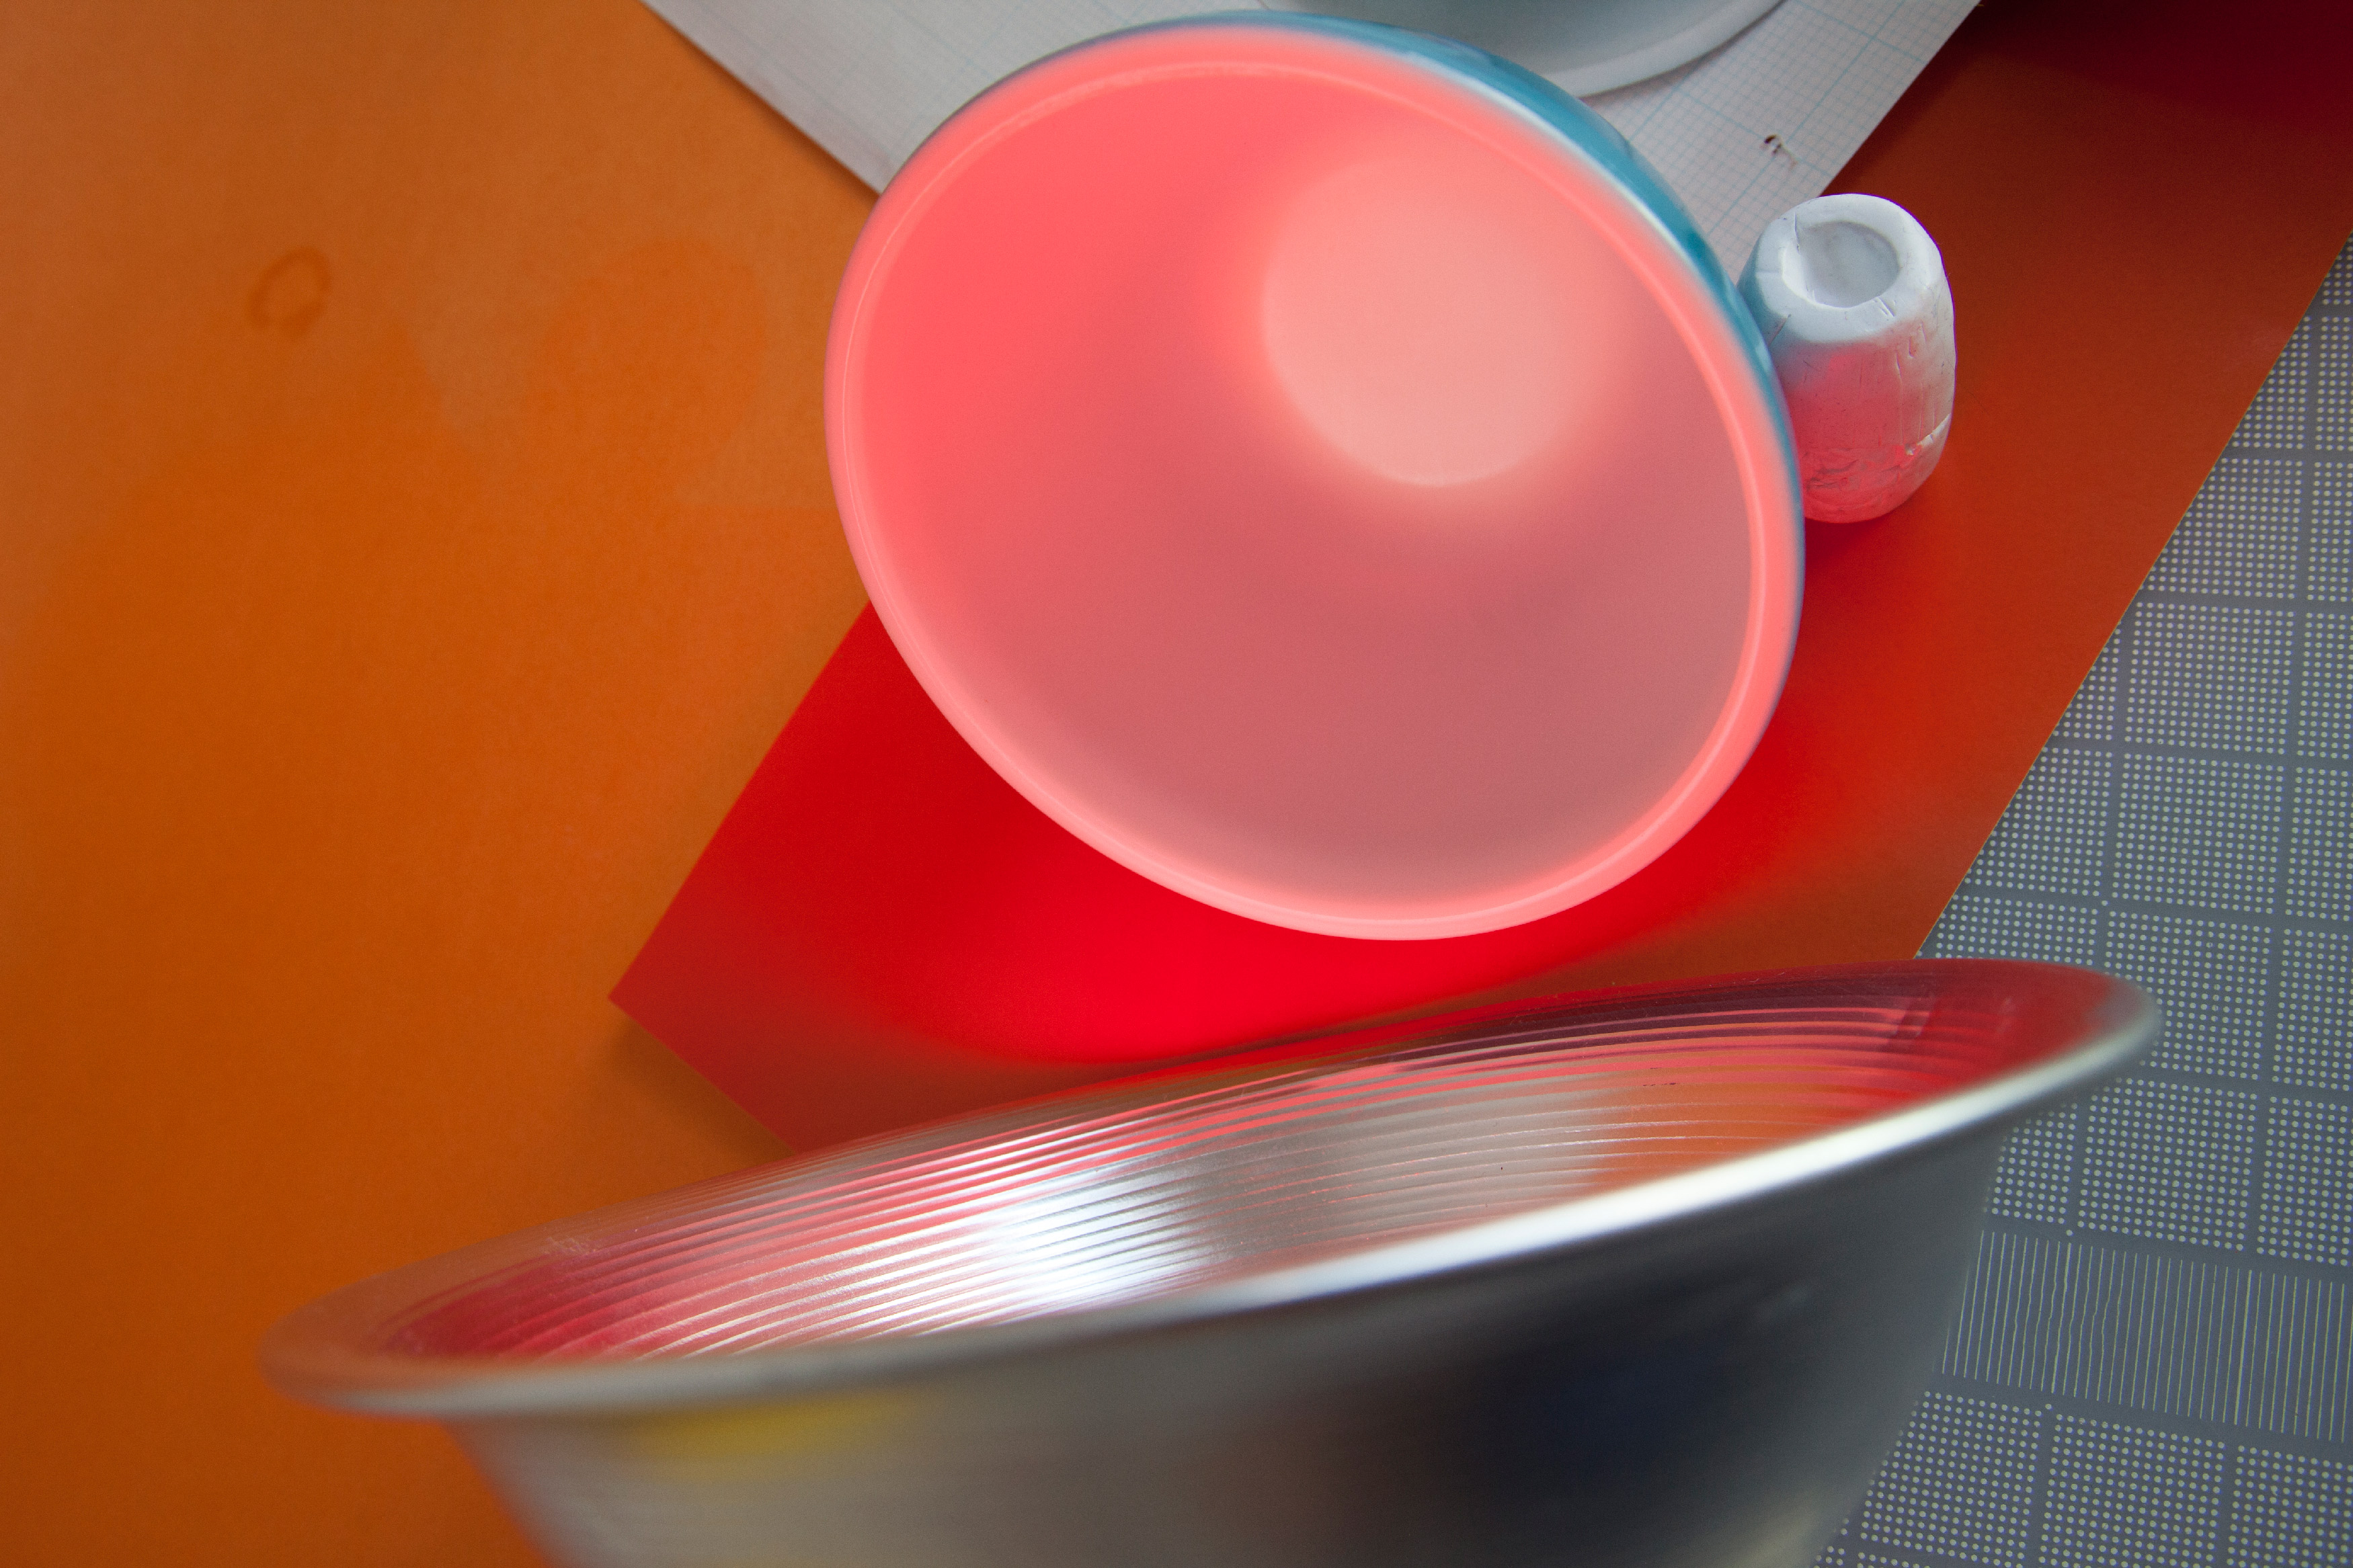 Janna_Dyk-05_untitled_mixing_bowl_cylinder_lamp_paper_2015_photography